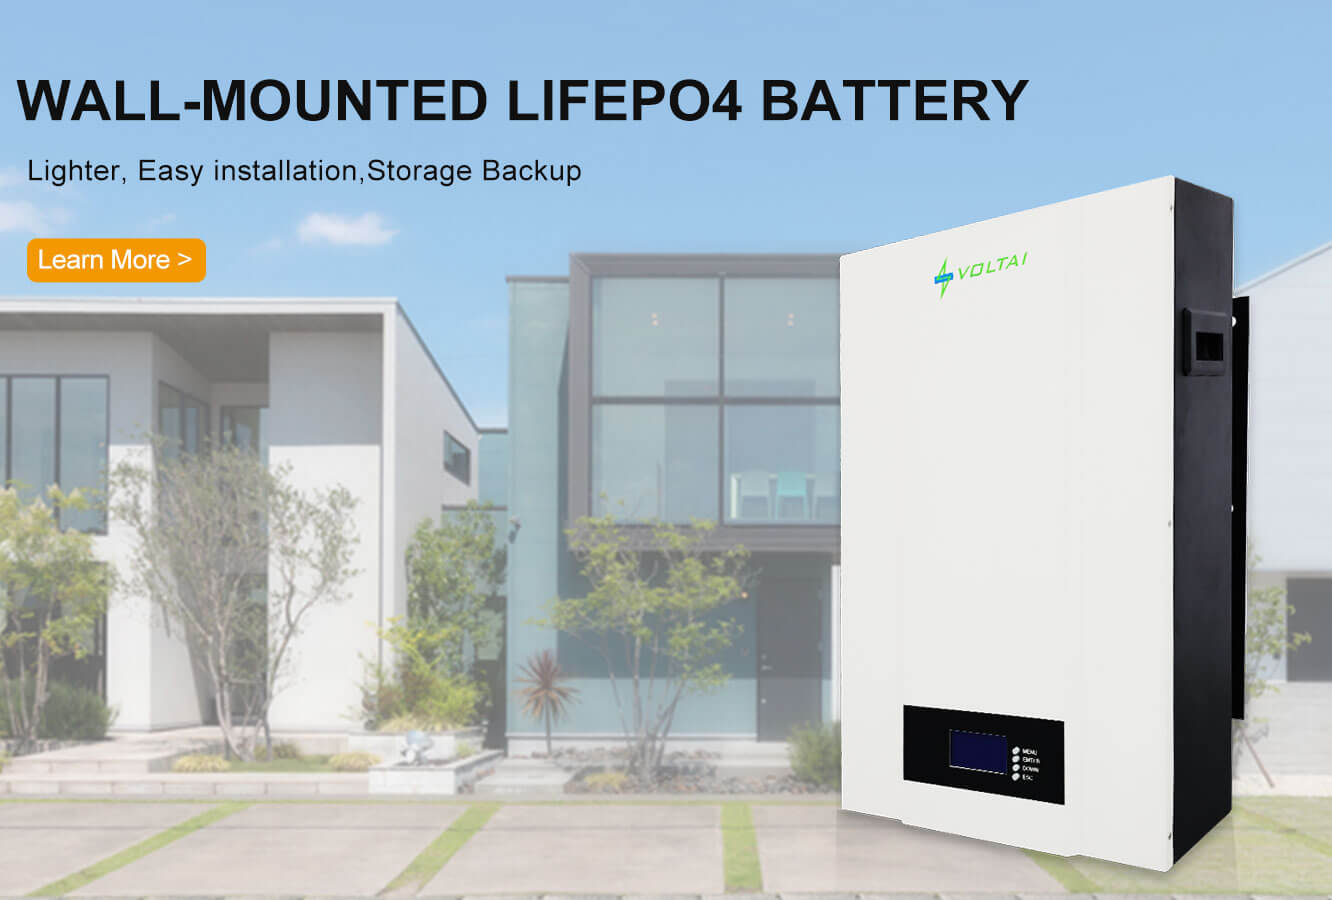 https://www.voltai-battery.com/5kwh-wall-mouted-lifepo4-lithium-ion-battery-product/